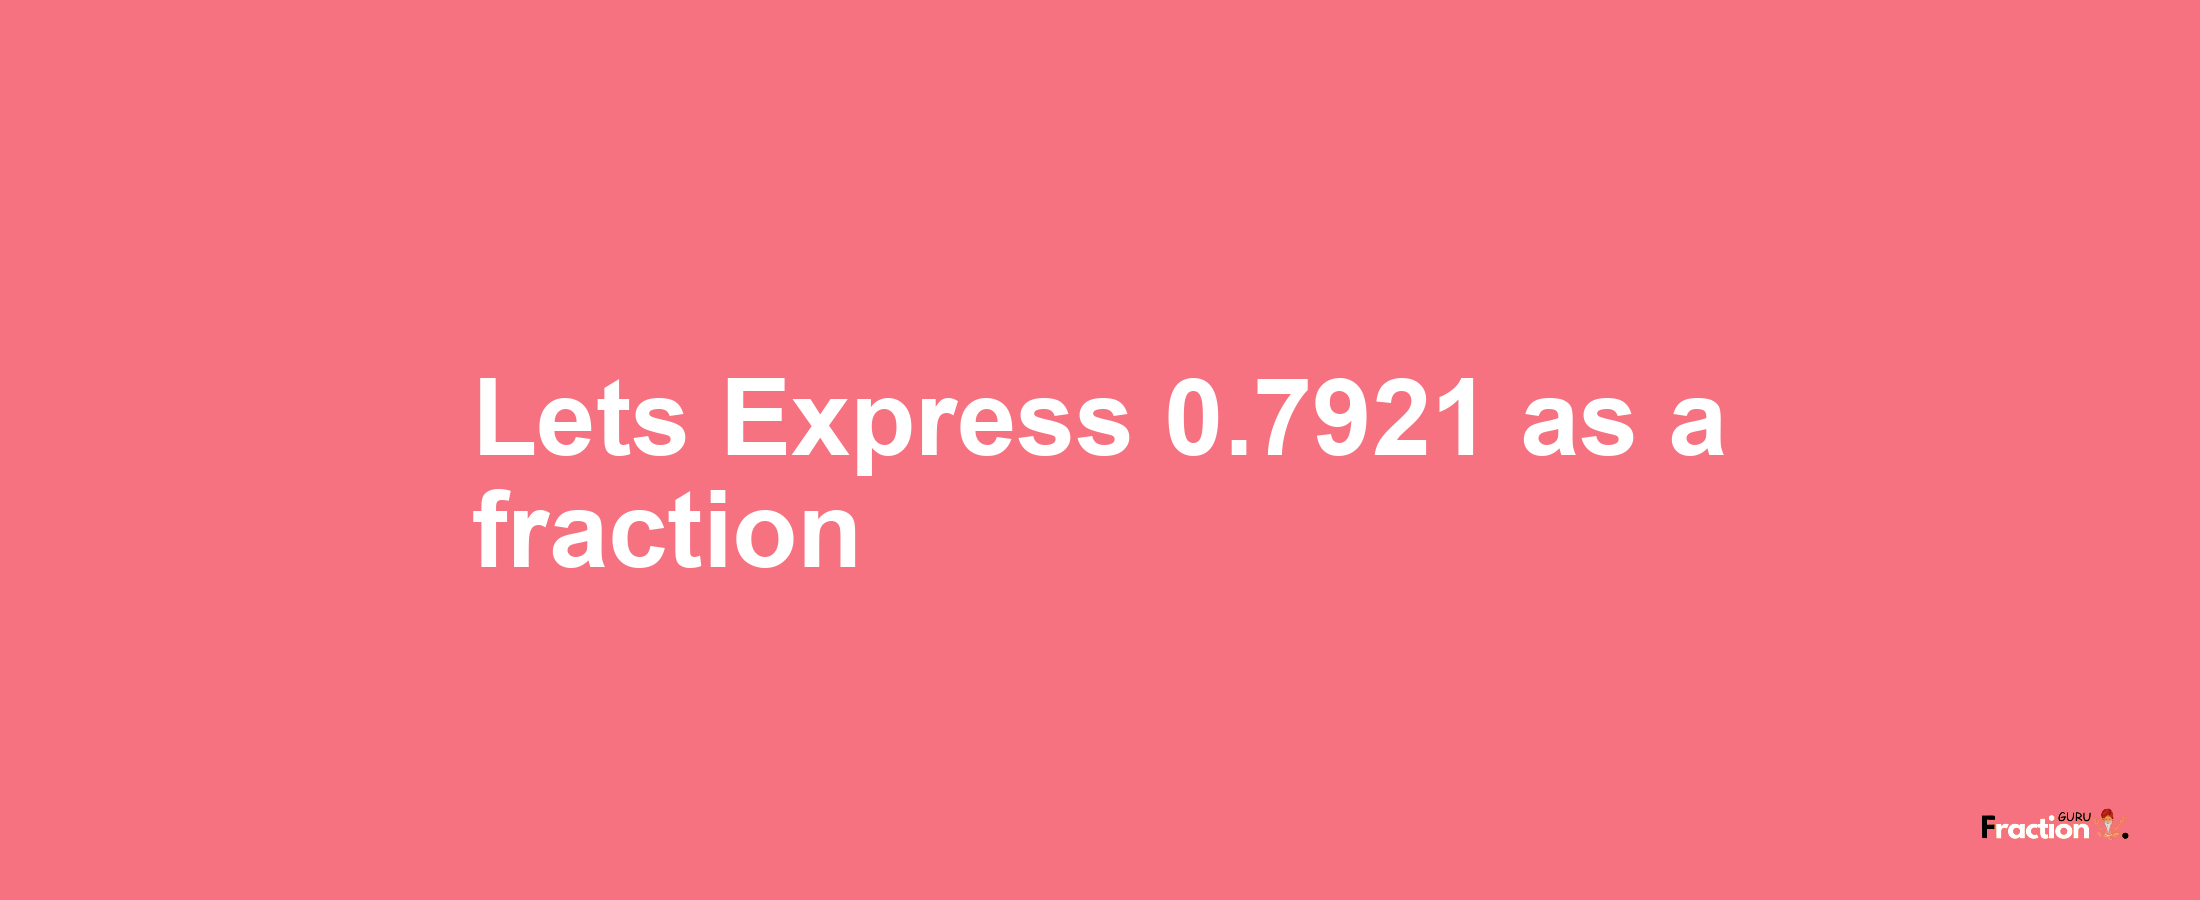 Lets Express 0.7921 as afraction